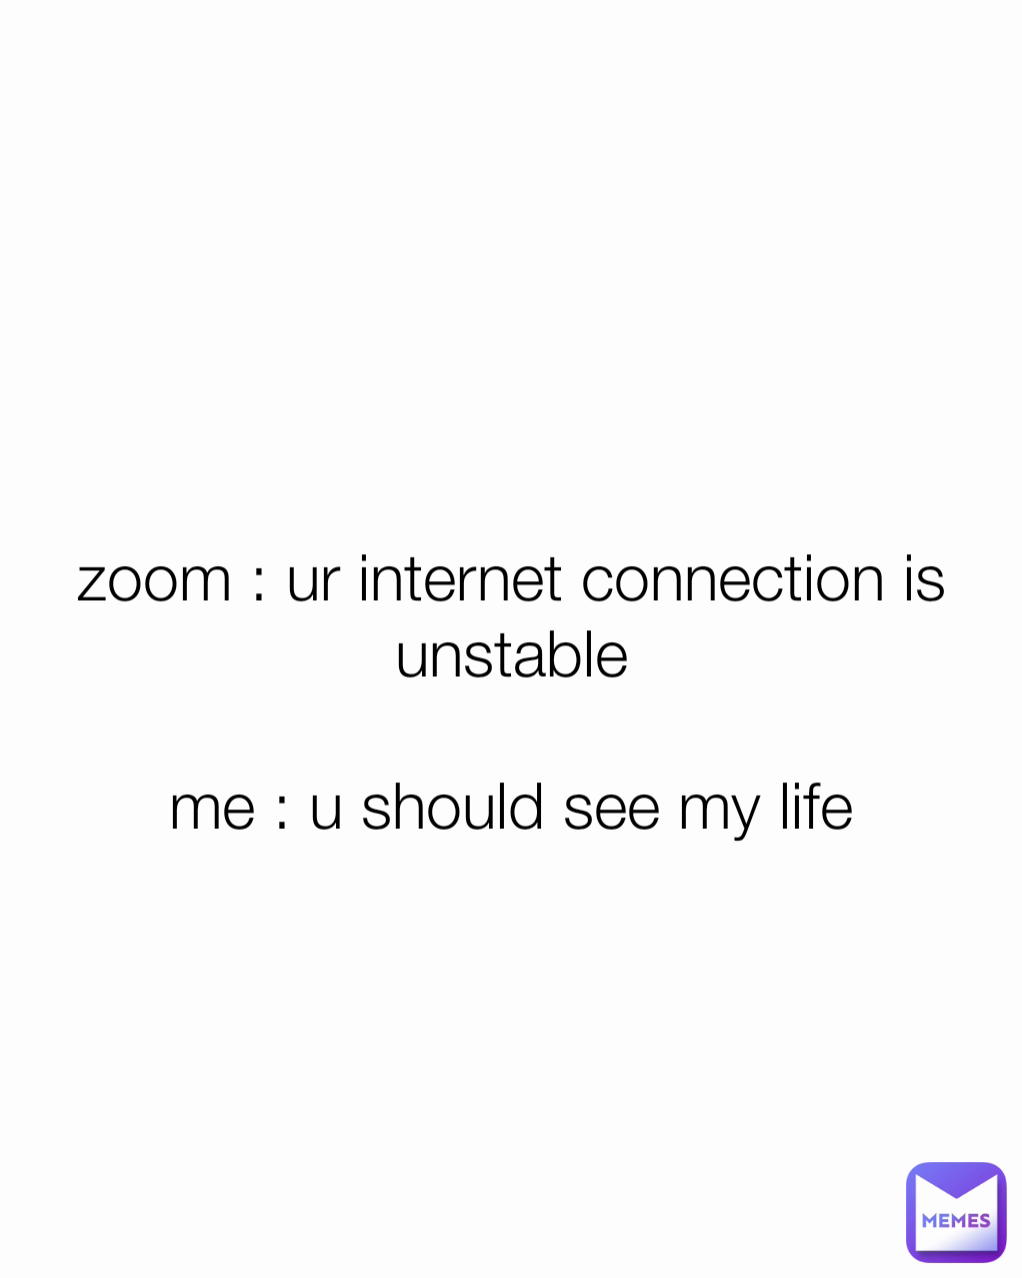 zoom : ur internet connection is unstable

me : u should see my life